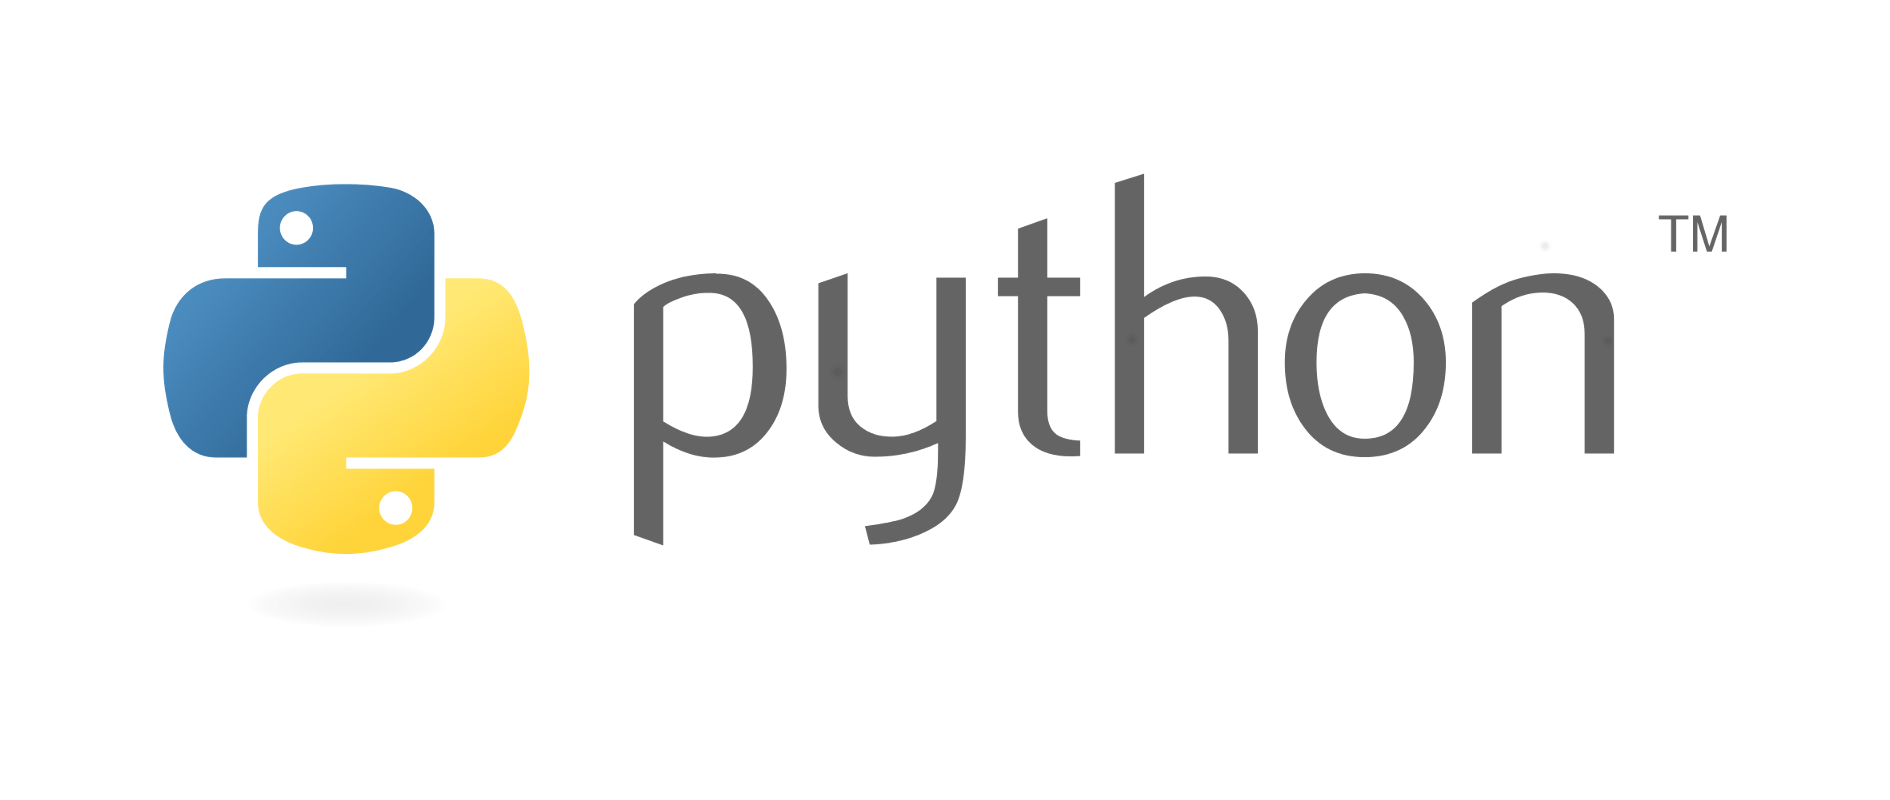 10 essential tips for programming in Python.